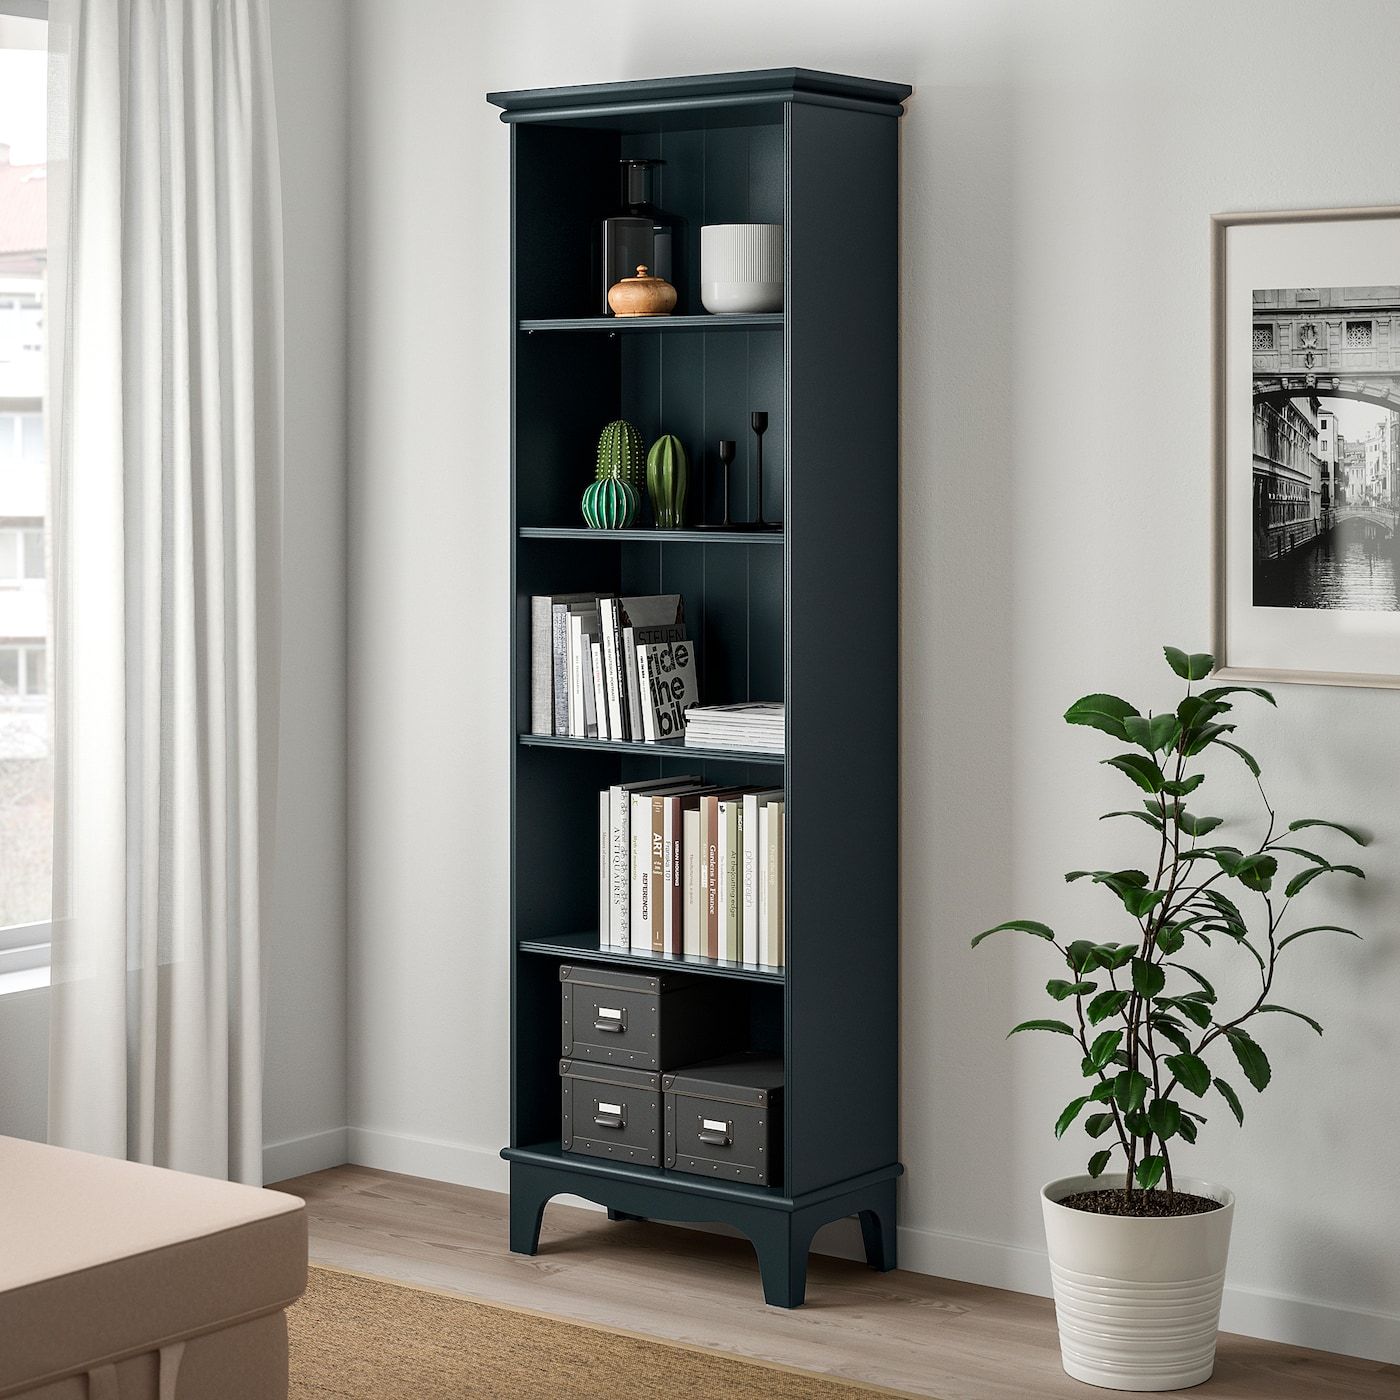 Lommarp Dark Blue Green, Bookcase, 65x199 Cm – Ikea Inside Navy Blue Bookcases (View 5 of 15)